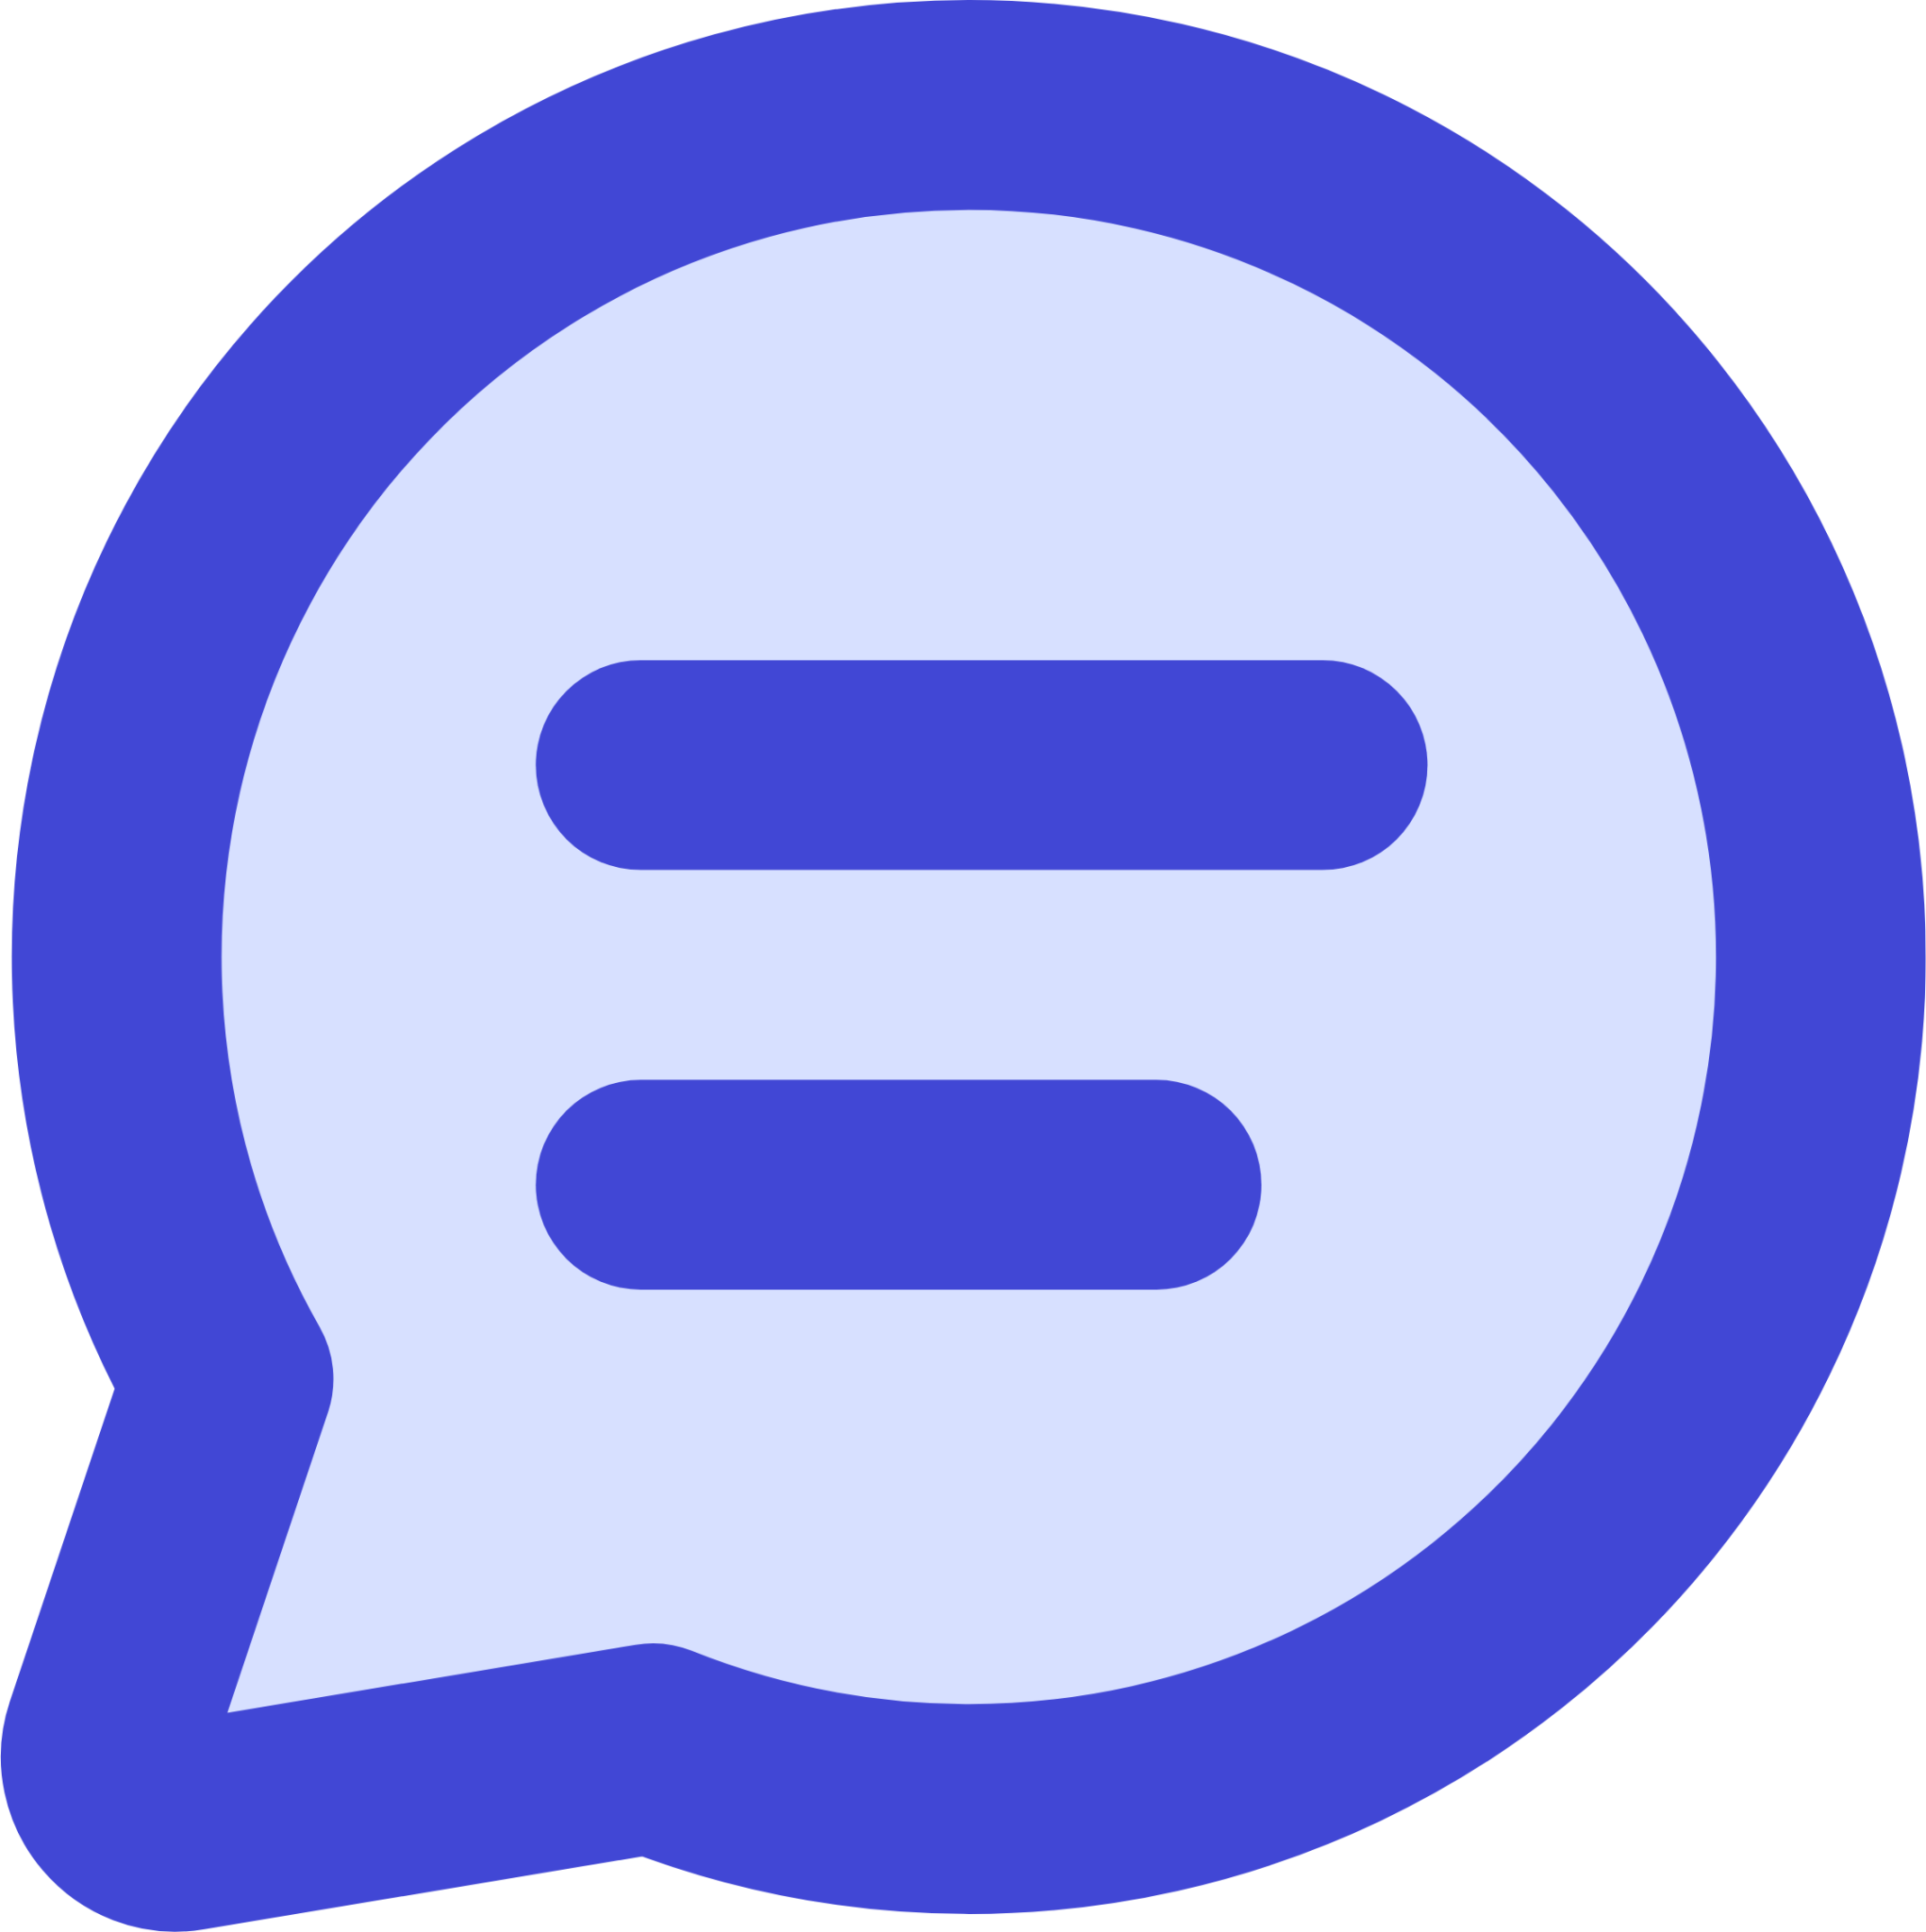 mail chat bubble text oval messages message bubble text chat icon